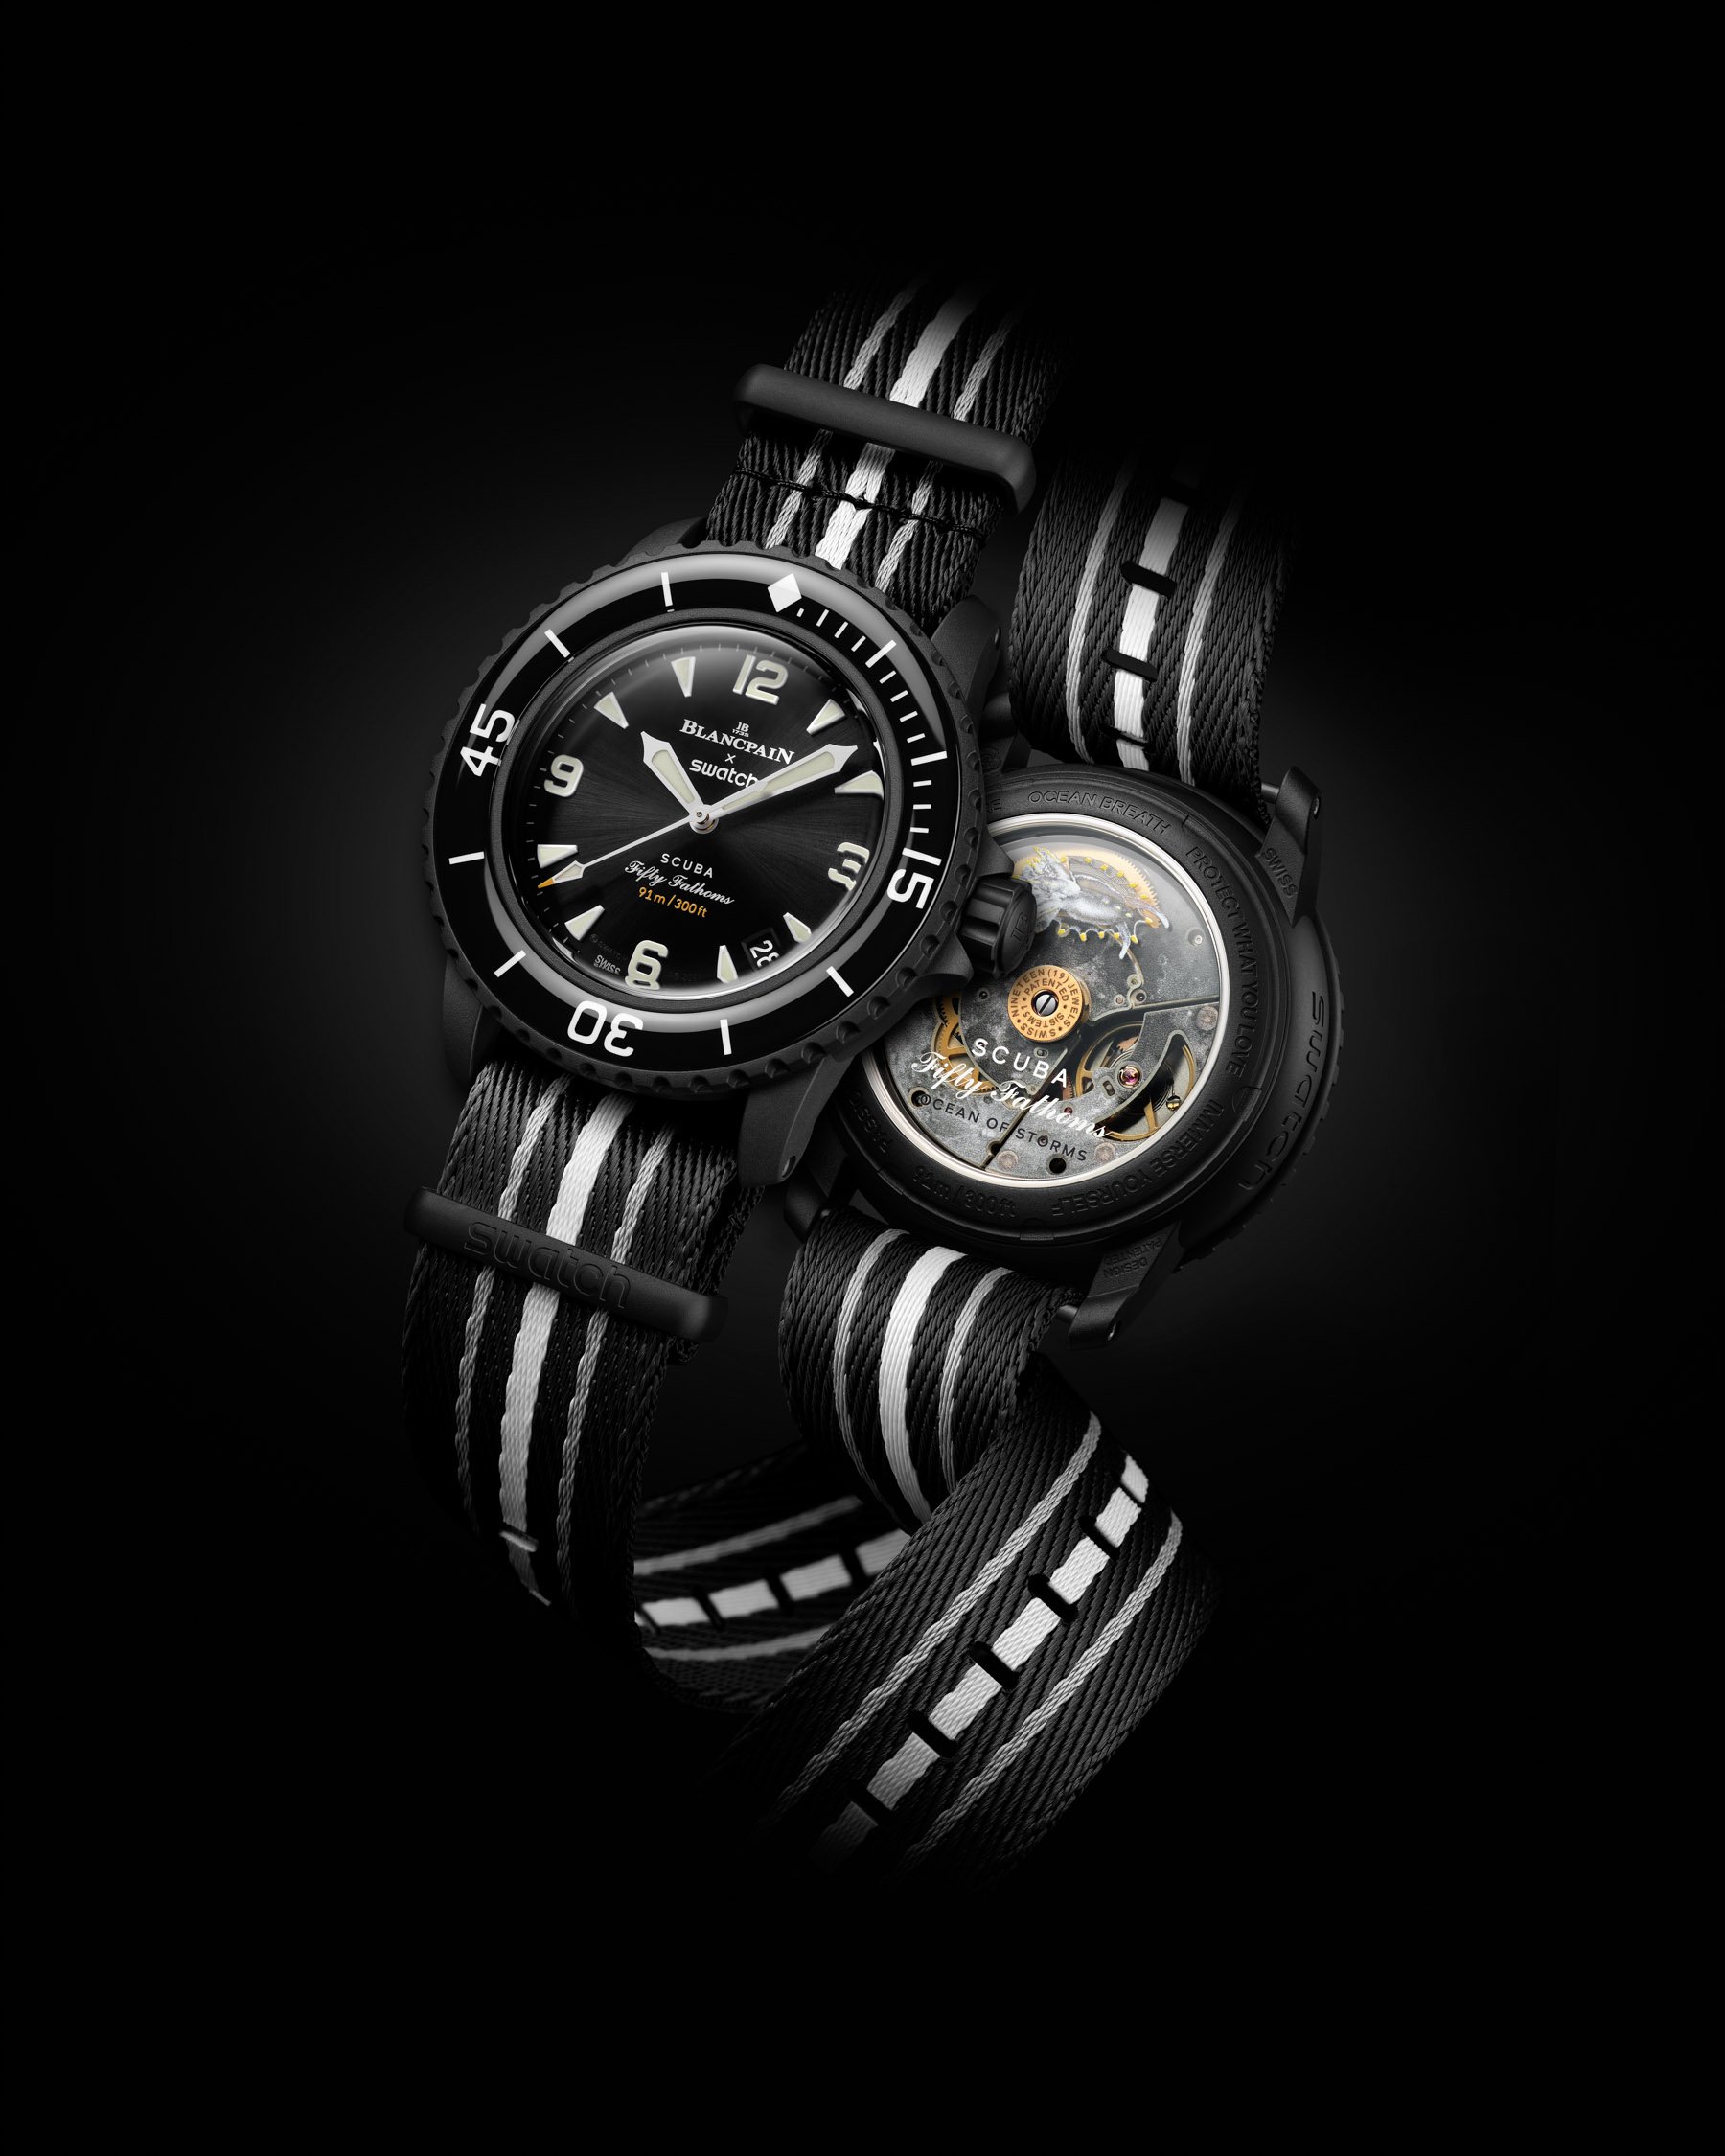 Blancpain × Swatch Scuba Fifty Fathoms Ocean of Storms